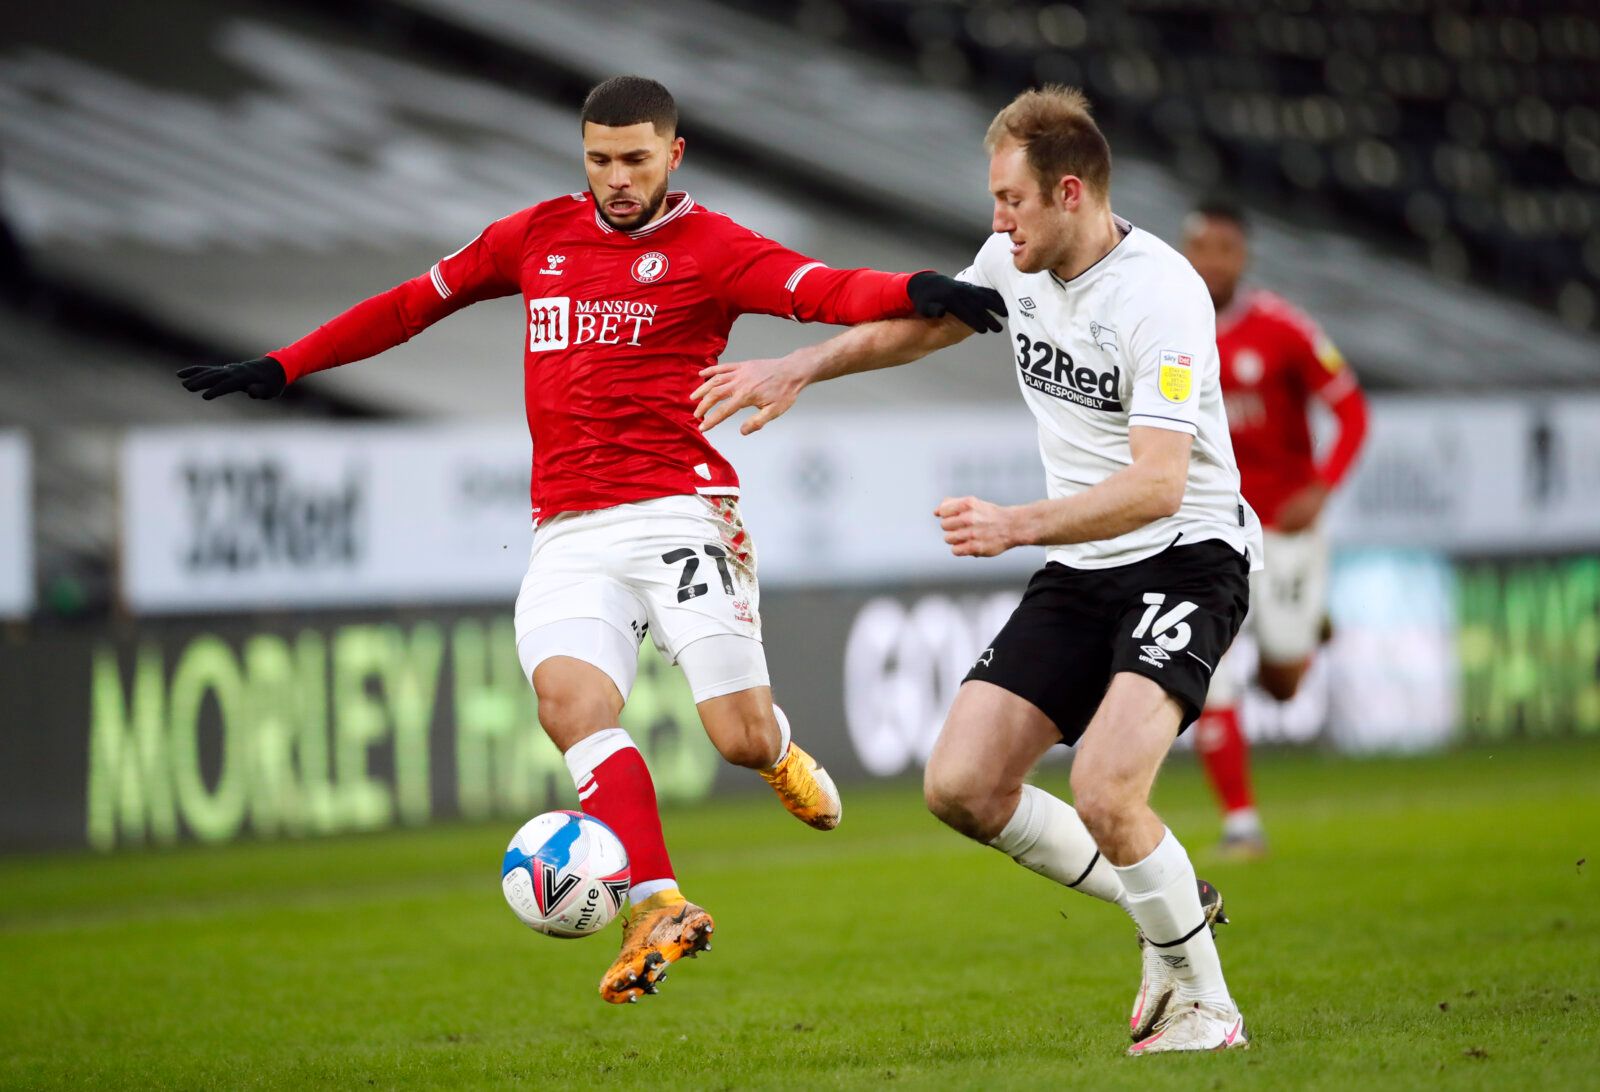 Soccer Football - Championship - Derby County v Bristol City - Pride Park, Derby, Britain - January 30, 2021 Bristol City's Nahki Wells in action with Derby County's Matt Clarke Action Images/Andrew Boyers EDITORIAL USE ONLY. No use with unauthorized audio, video, data, fixture lists, club/league logos or 'live' services. Online in-match use limited to 75 images, no video emulation. No use in betting, games or single club /league/player publications.  Please contact your account representative f